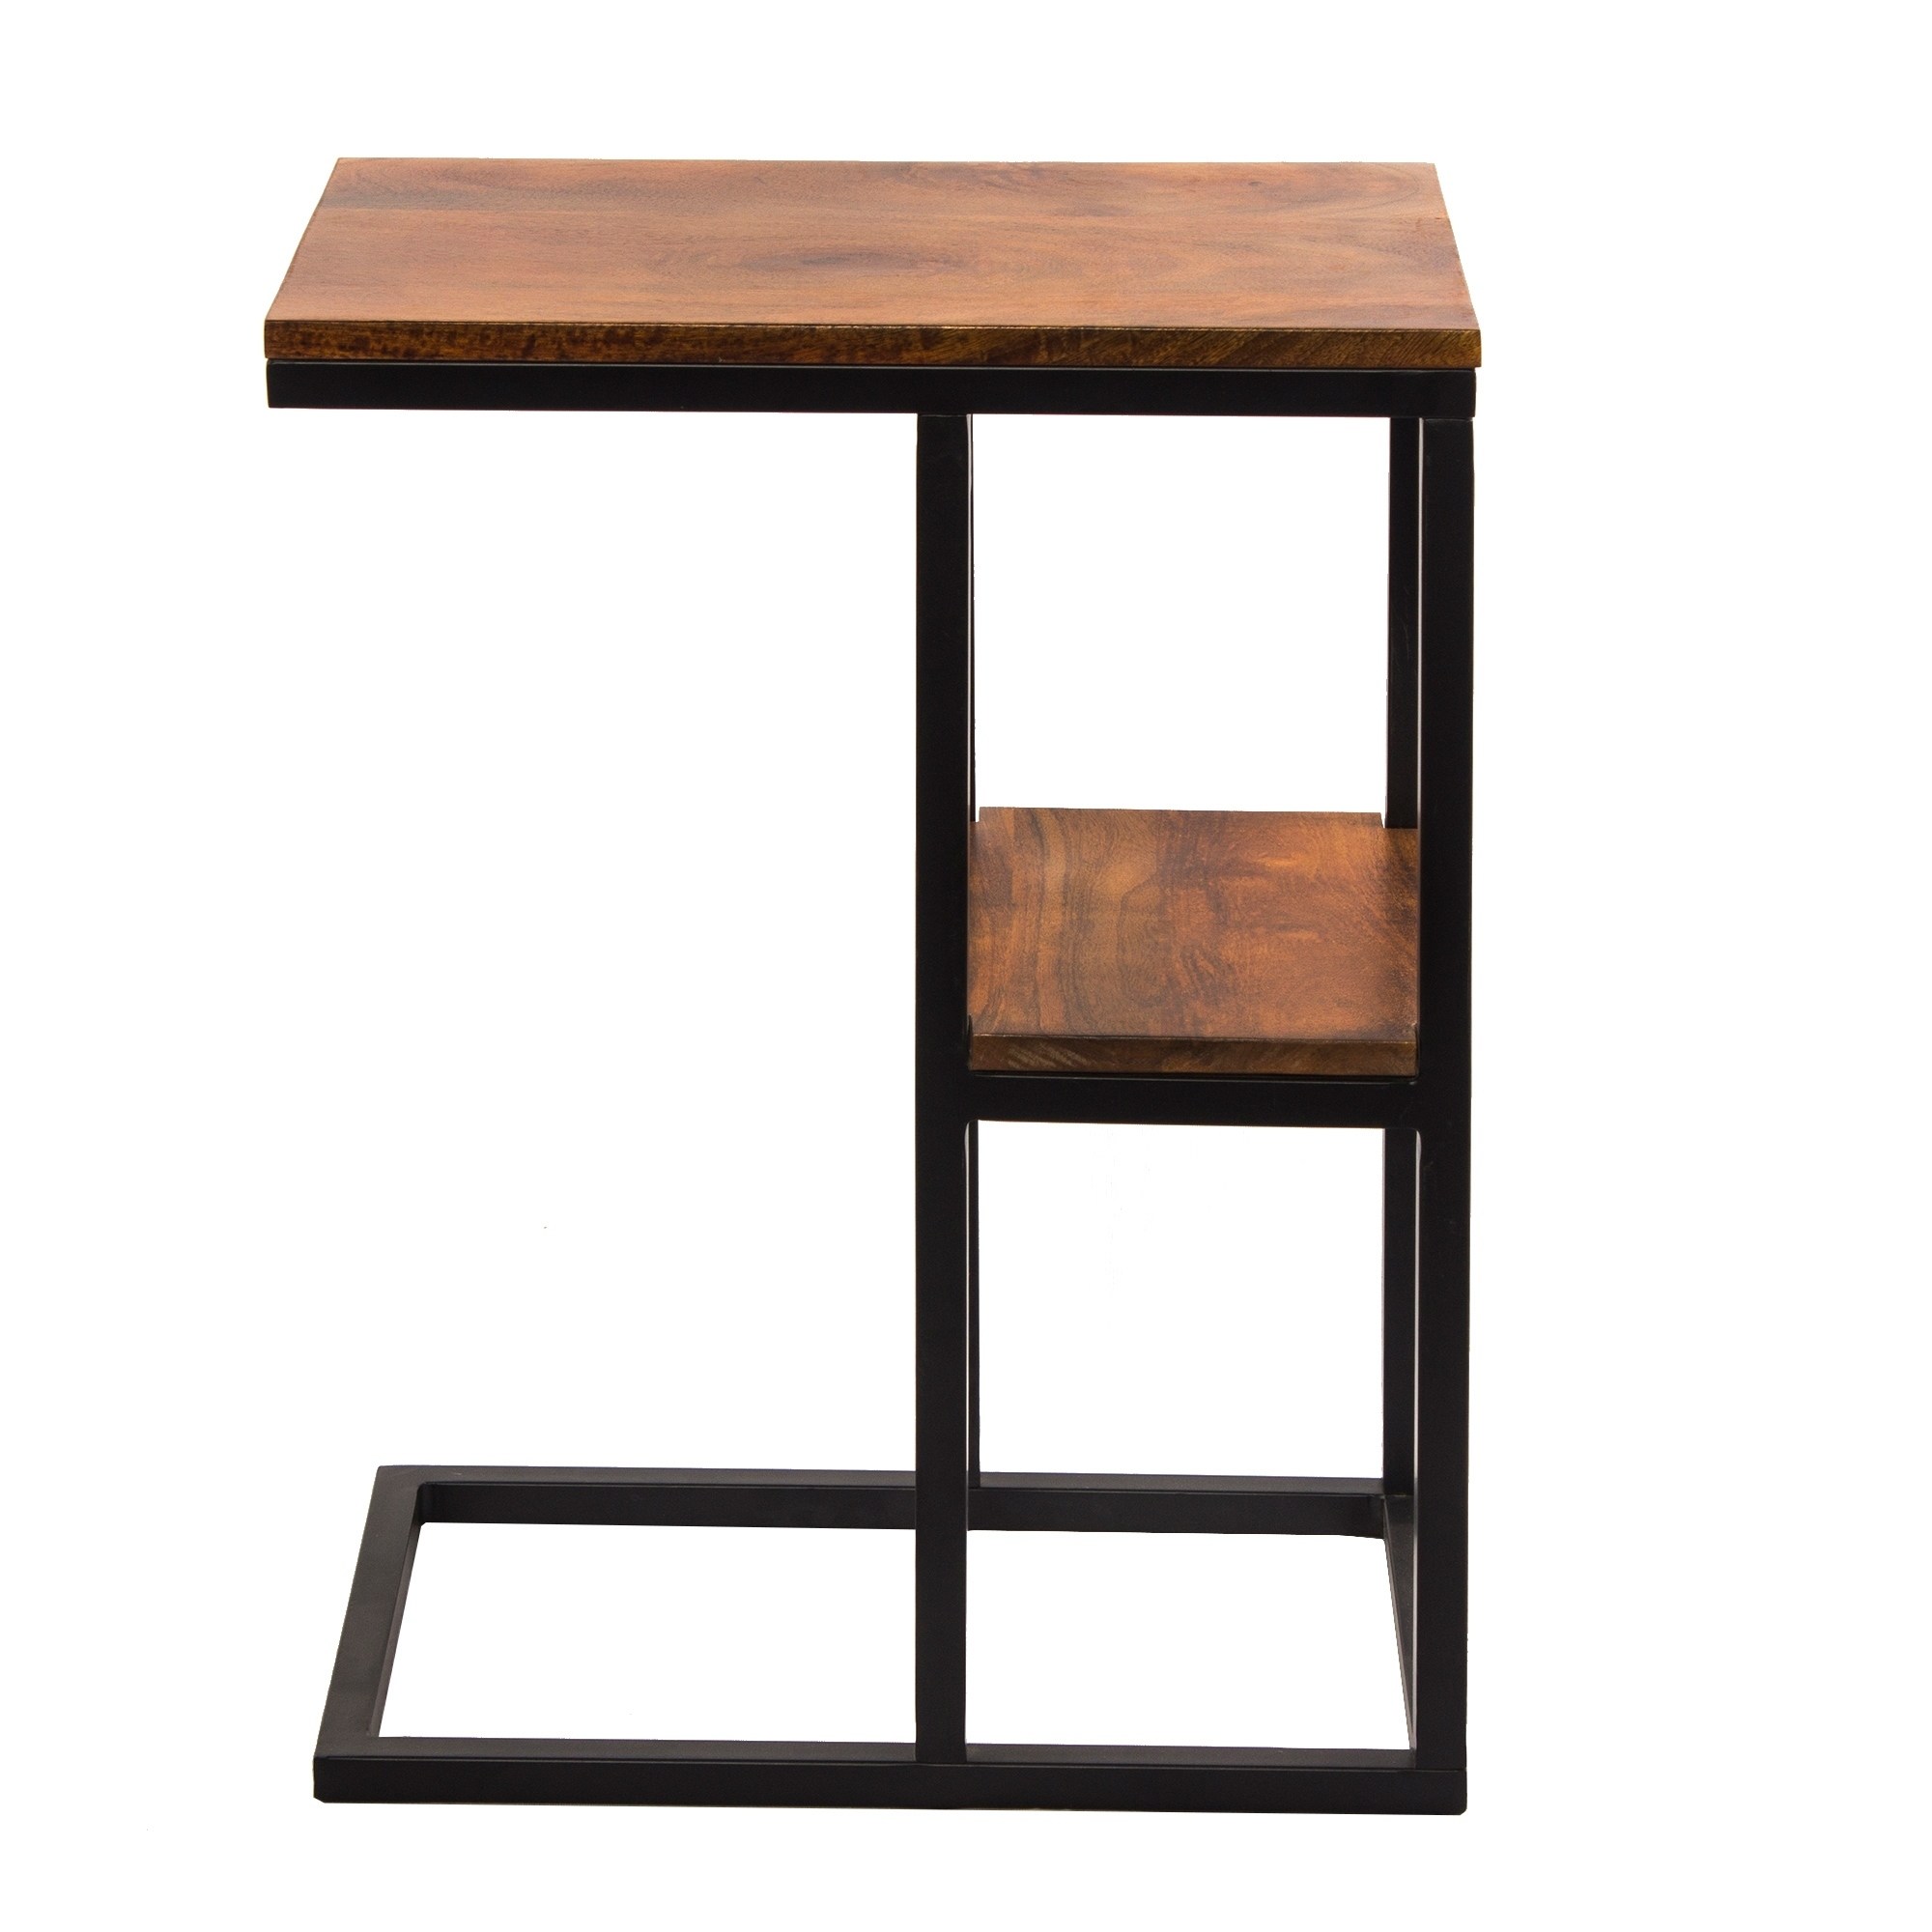 iron framed mango wood accent table with lower shelf brown free shipping today colorful lamps pretty round tablecloths bath wedding registry olive green side oblong tablecloth